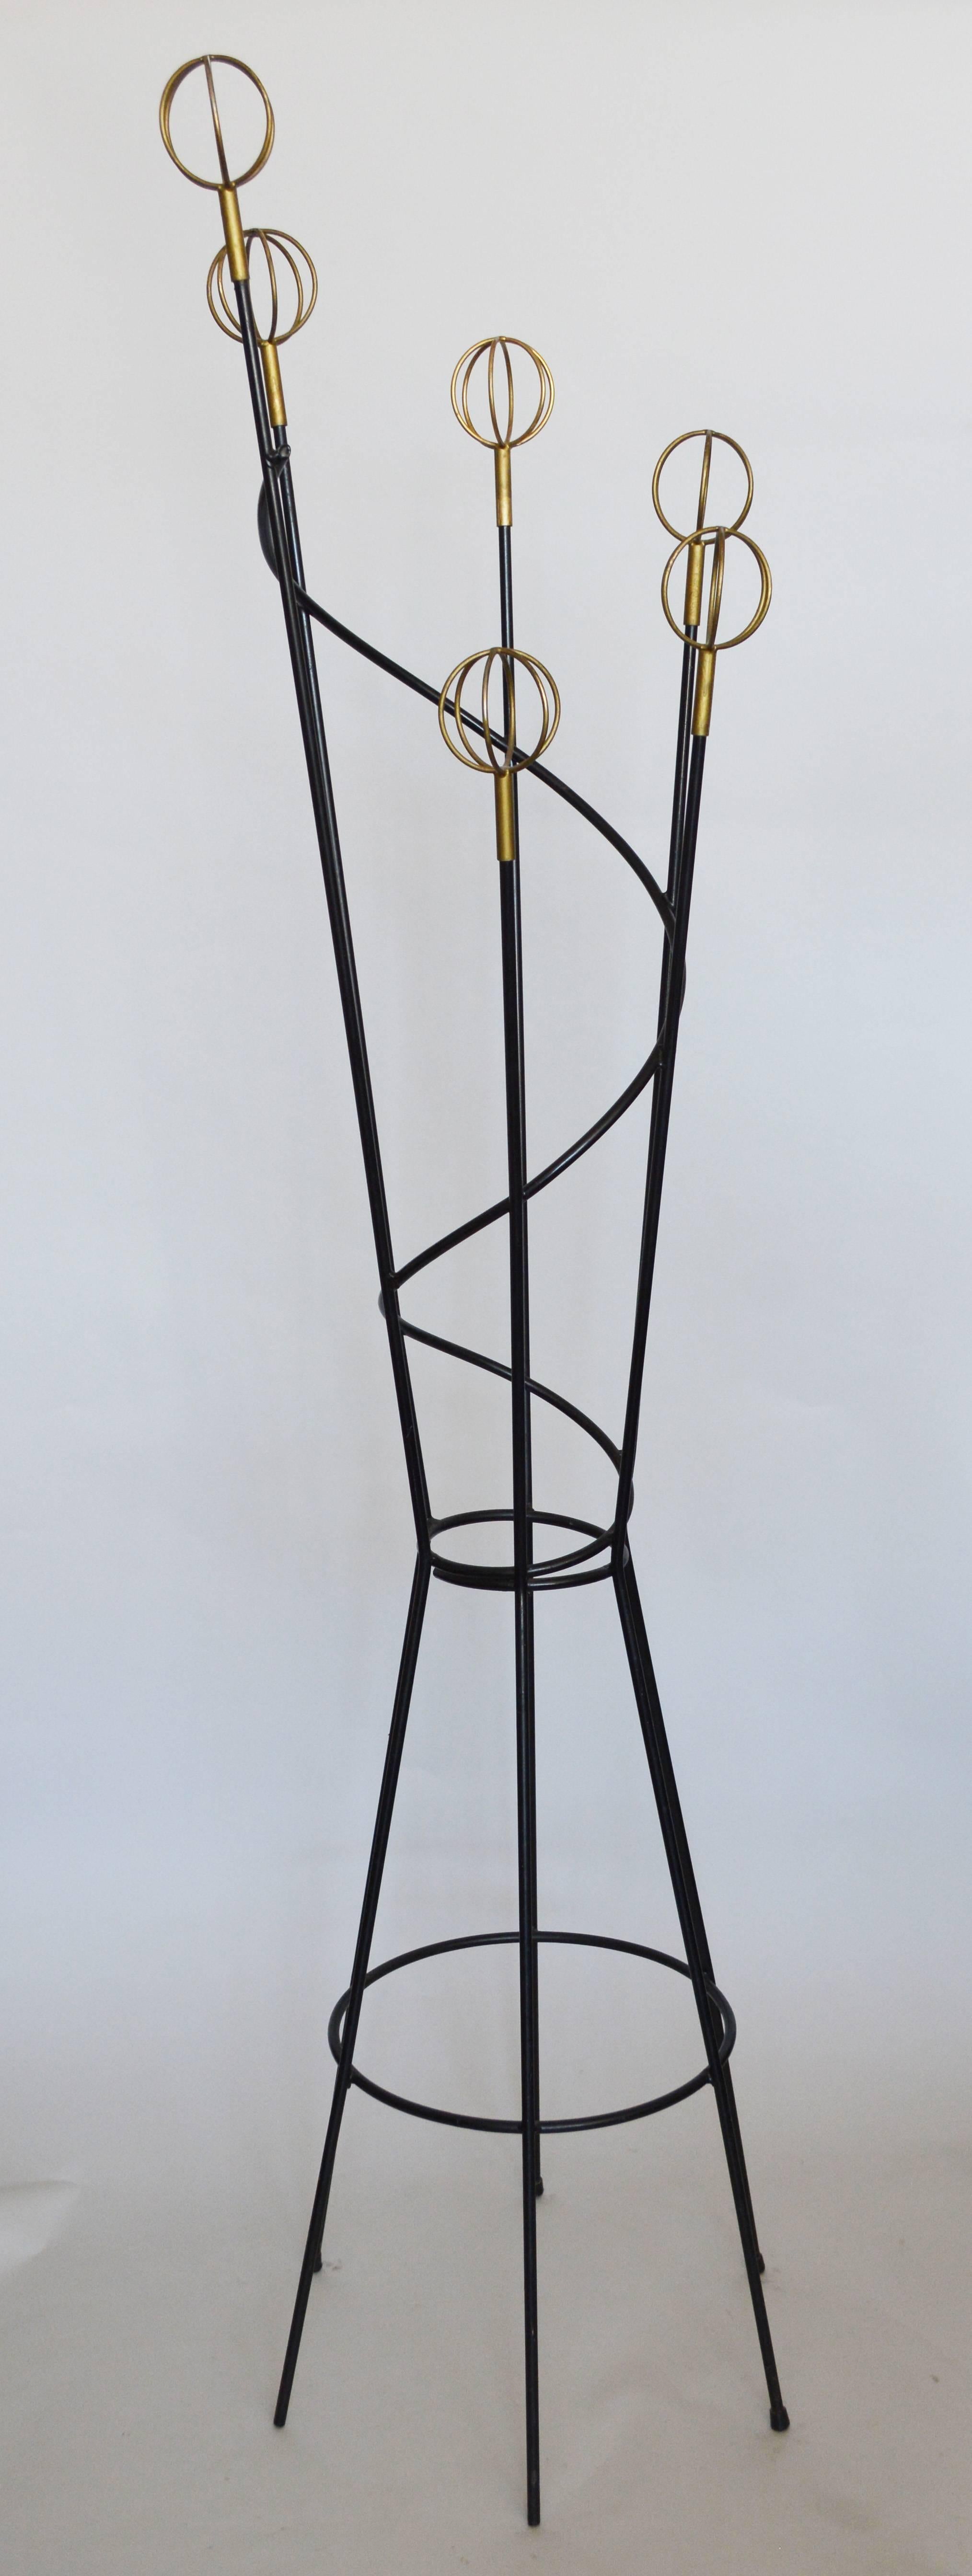 French modernist iron coat rack designed by Roger Feraud for Geo. This rack is iron with brass plate wire balls. The brass has been painted gold at some point in the past. It appears it was to cover rust on some areas. There are some losses of black